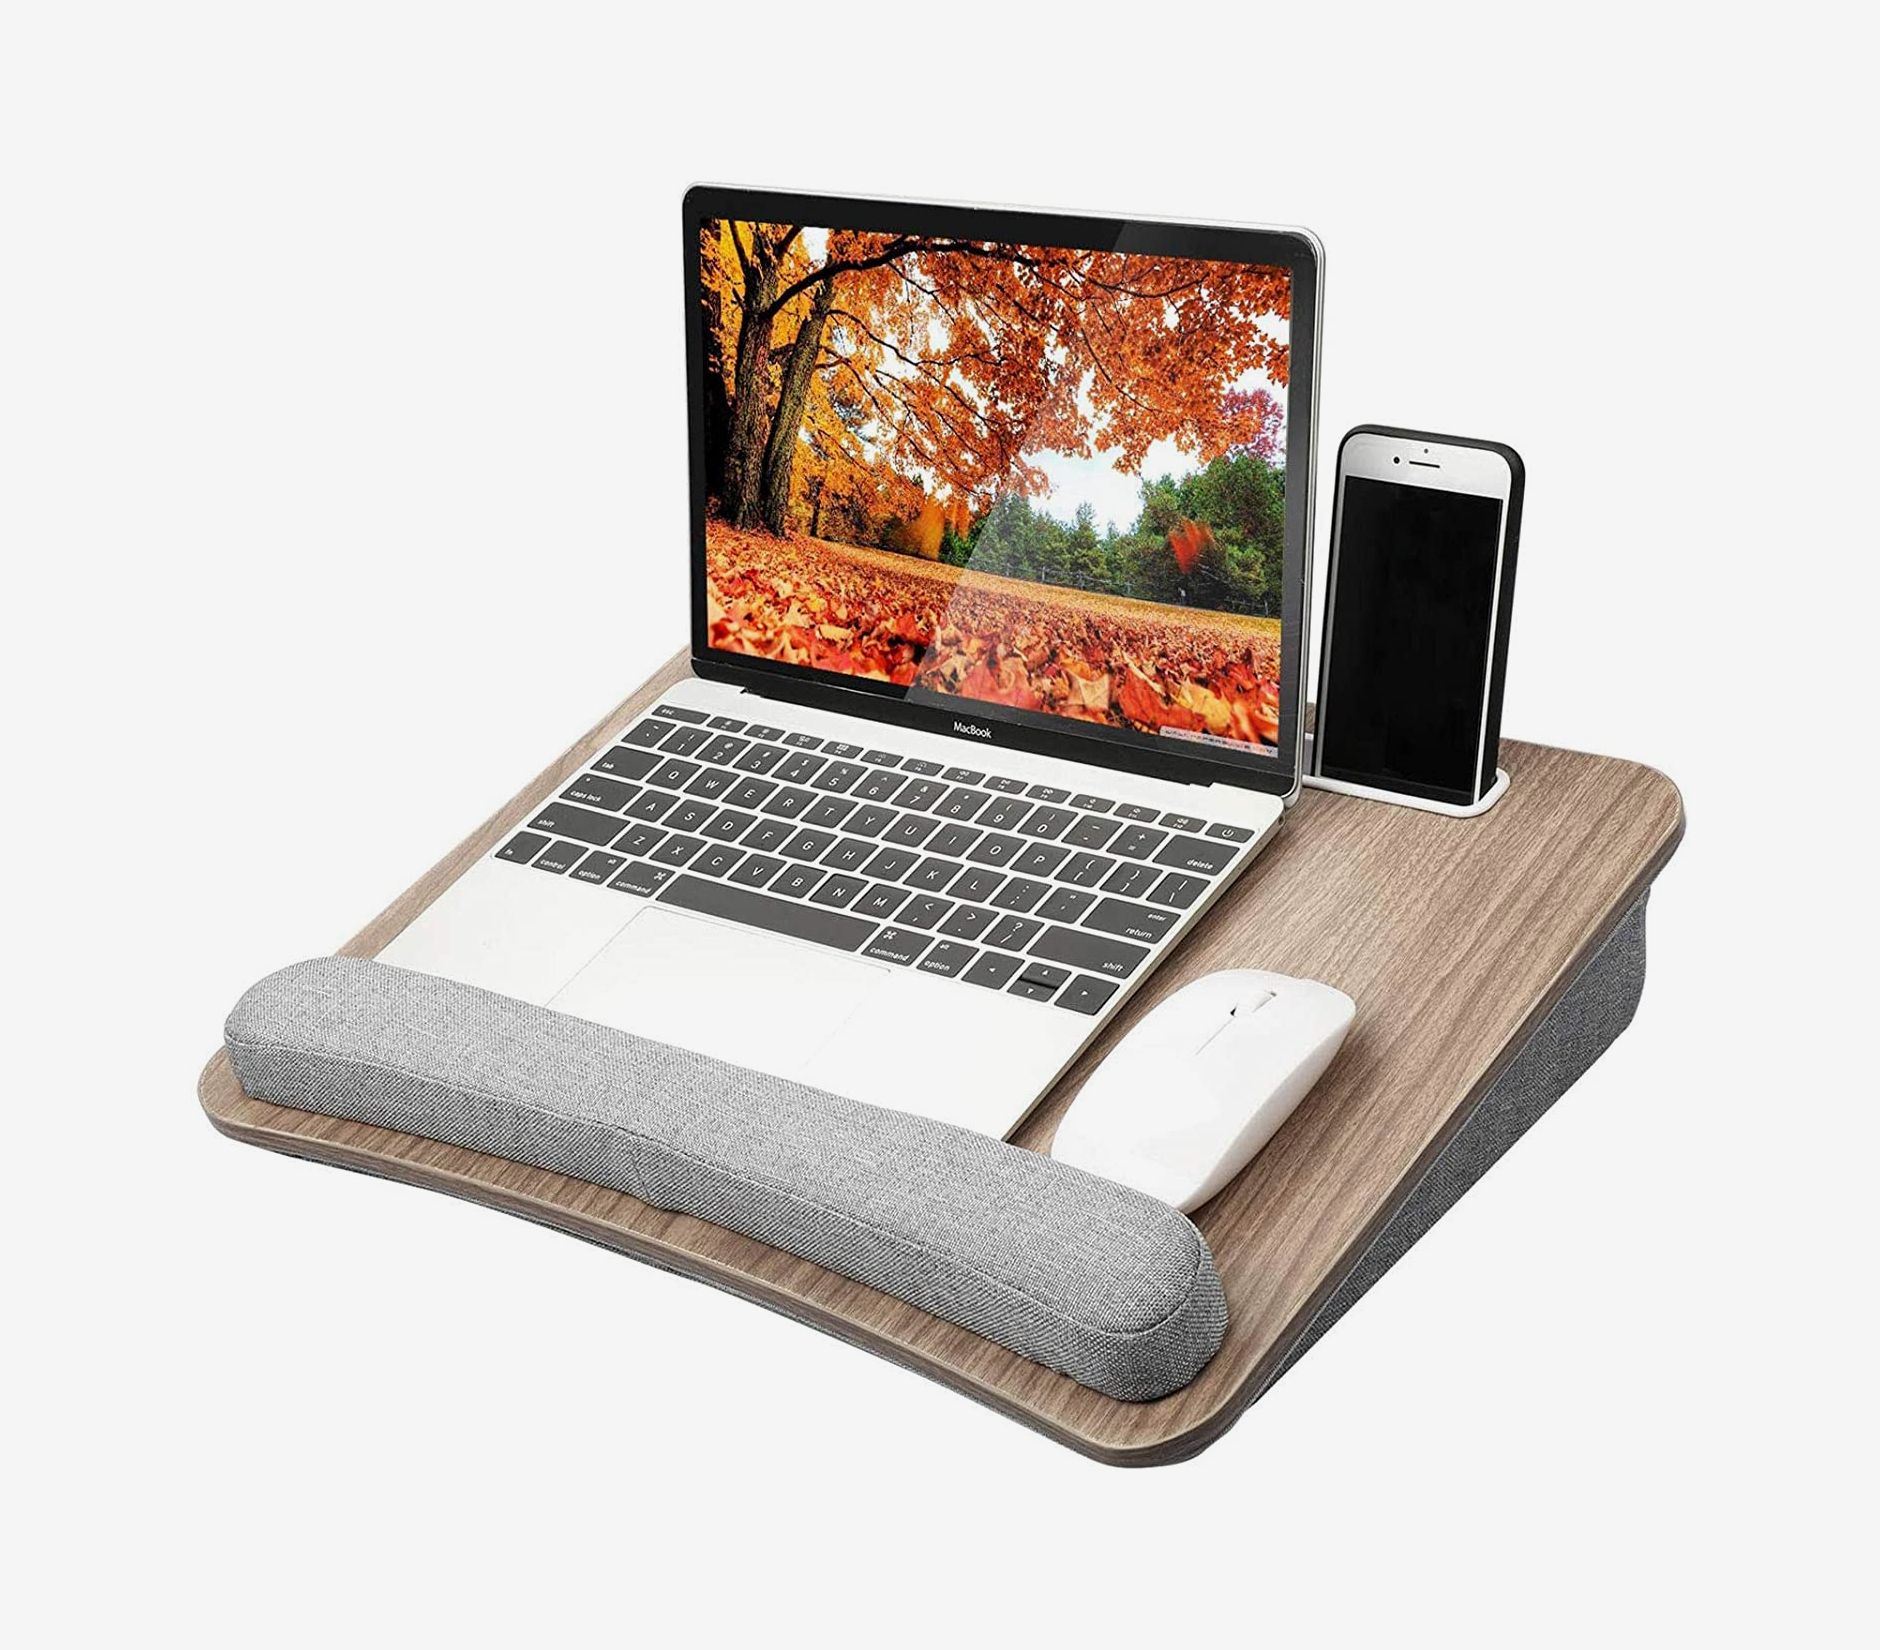 Home Office Lap Desk Extra Wide New Design With Phone Slot Fits Up To 17" Laptop 